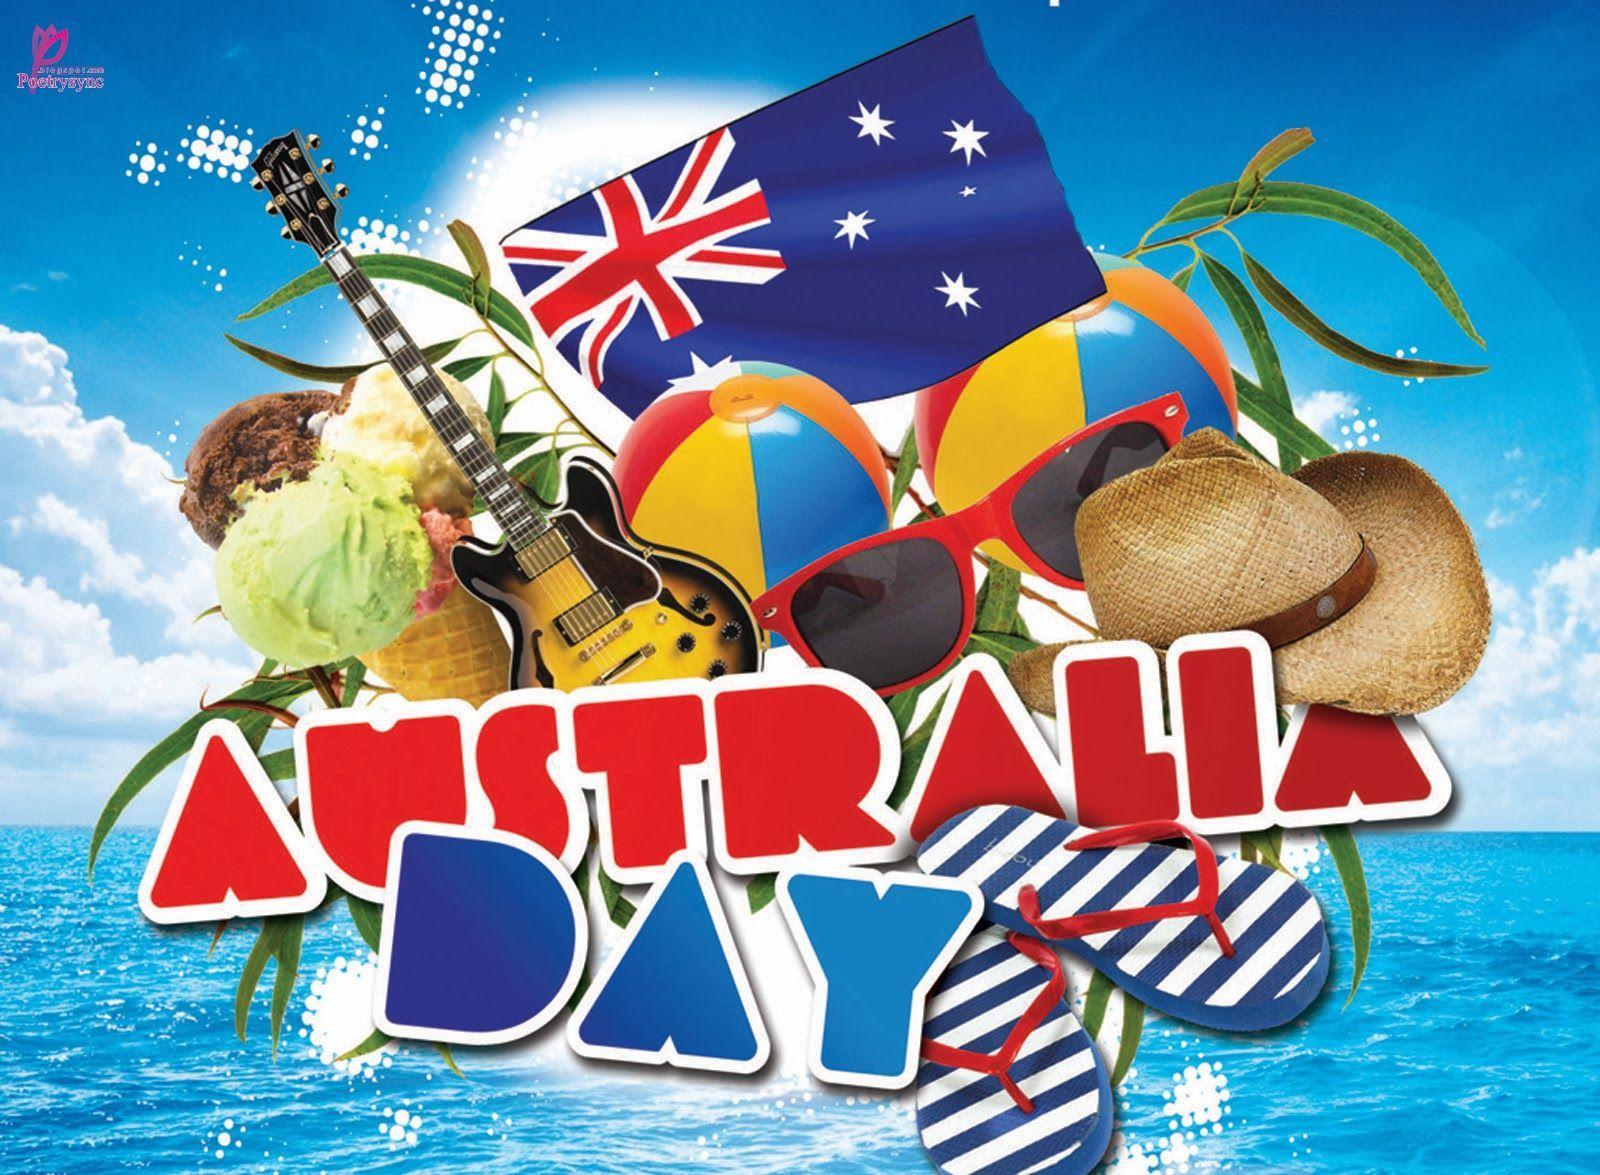 Happy Australia Day Greetings Wallpaper and Wishes Quotes